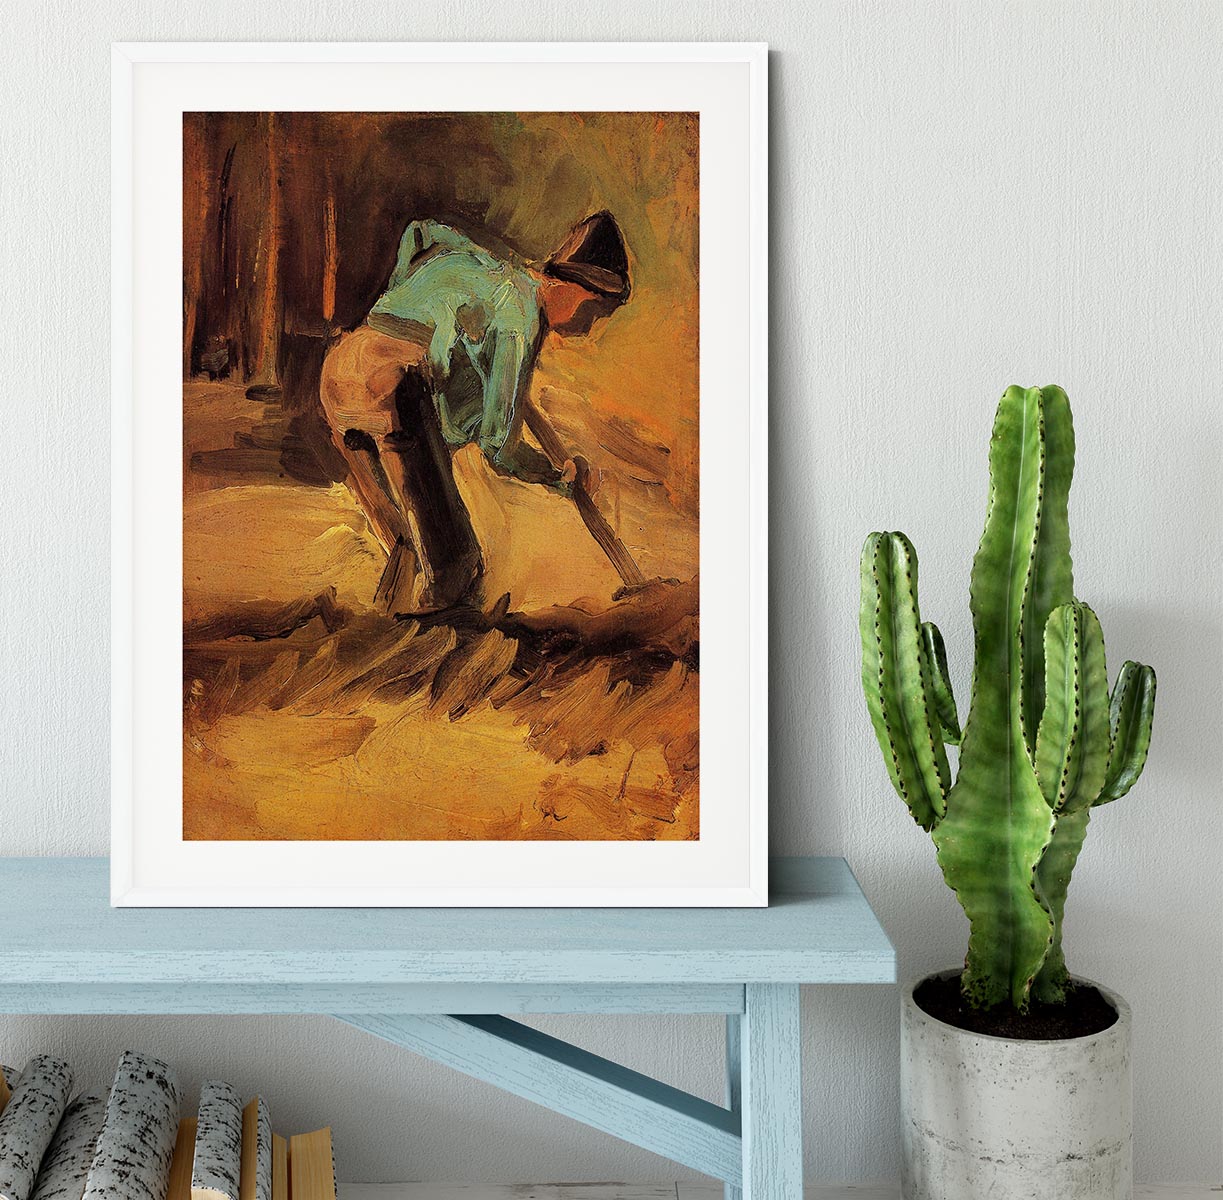 Man Stooping with Stick or Spade by Van Gogh Framed Print - Canvas Art Rocks - 5